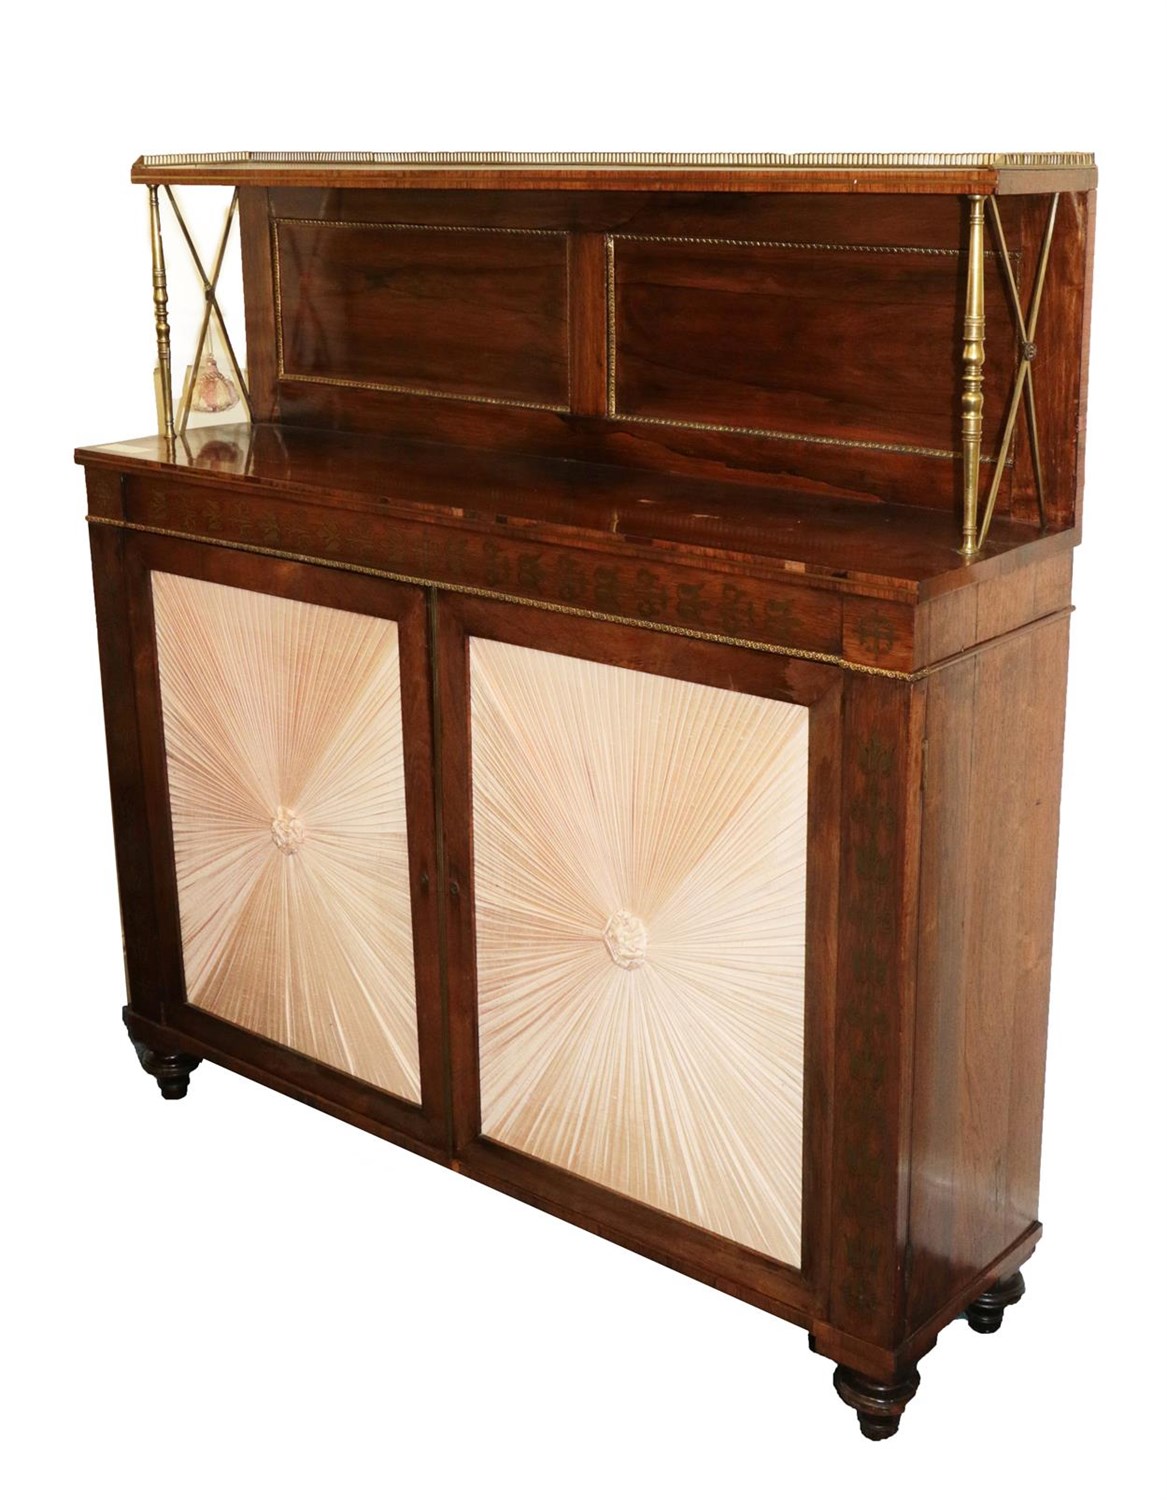 Lot 471 - A Regency Rosewood and Brass Inlaid Chiffonier, early 19th century, the superstructure with...